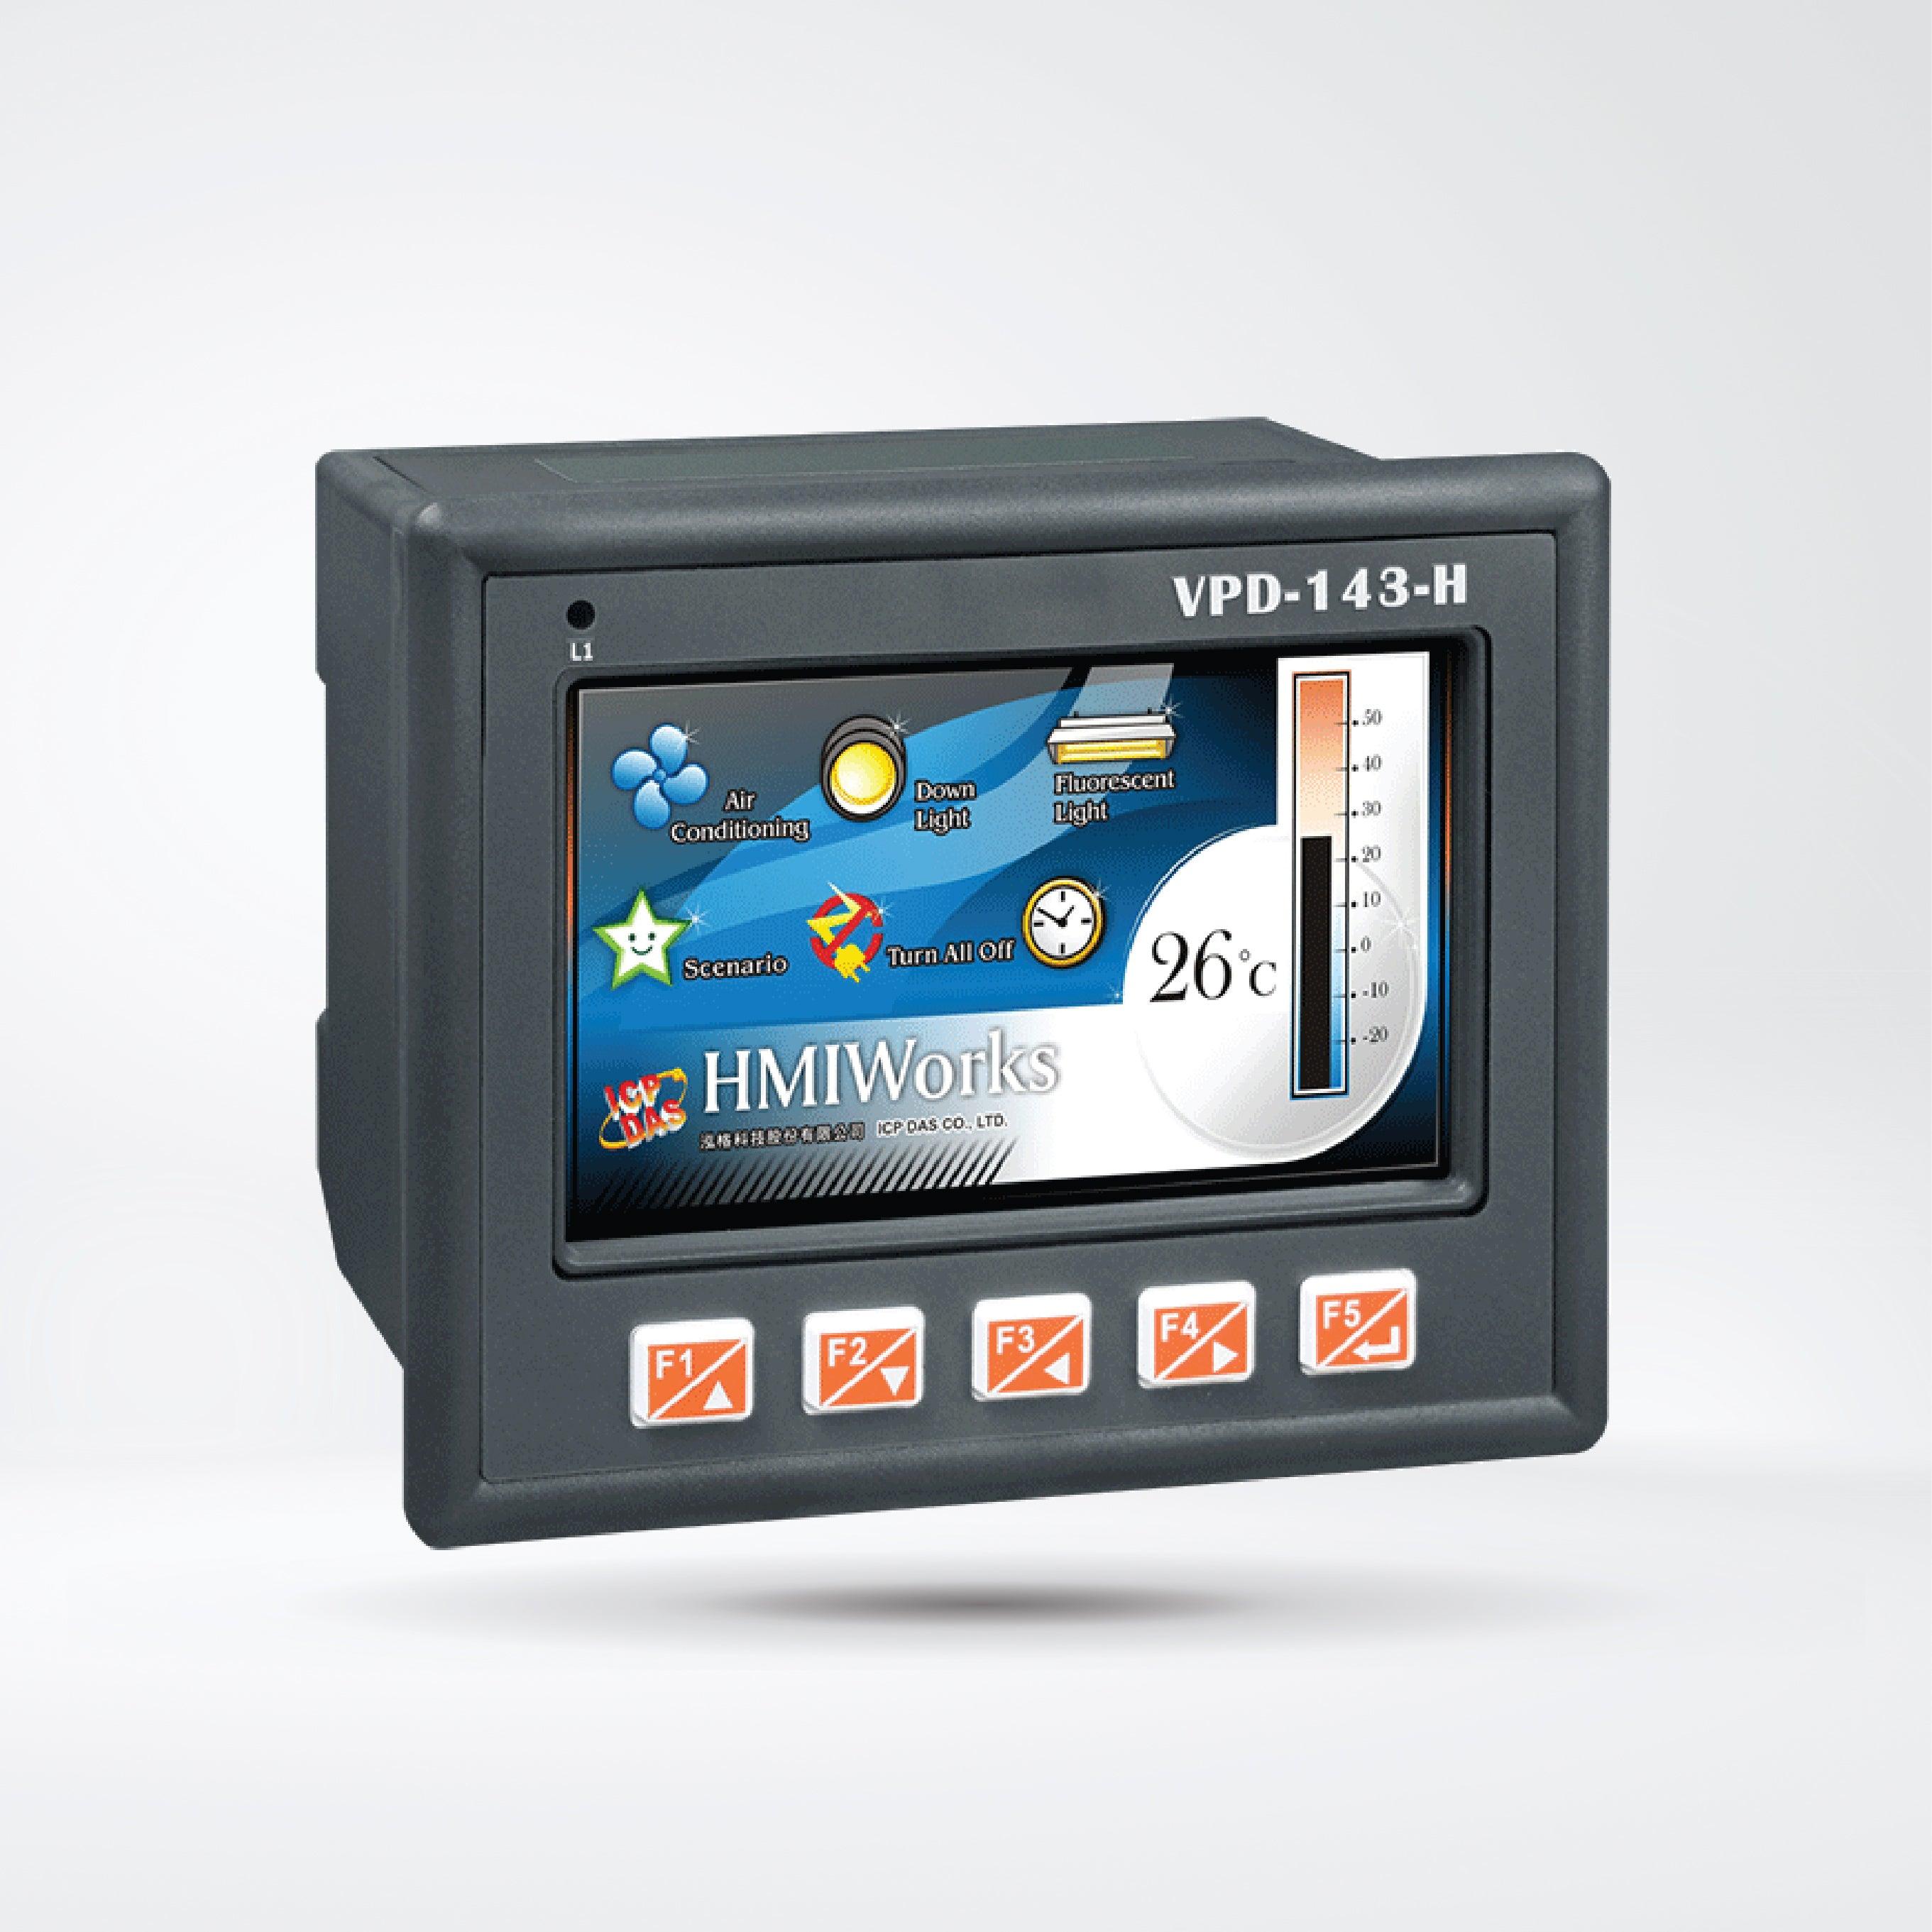 VPD-143-H 4.3" Touch HMI Device with 2 x RS-232/RS-485, Ethernet (PoE) and Rubber Keypad - Riverplus